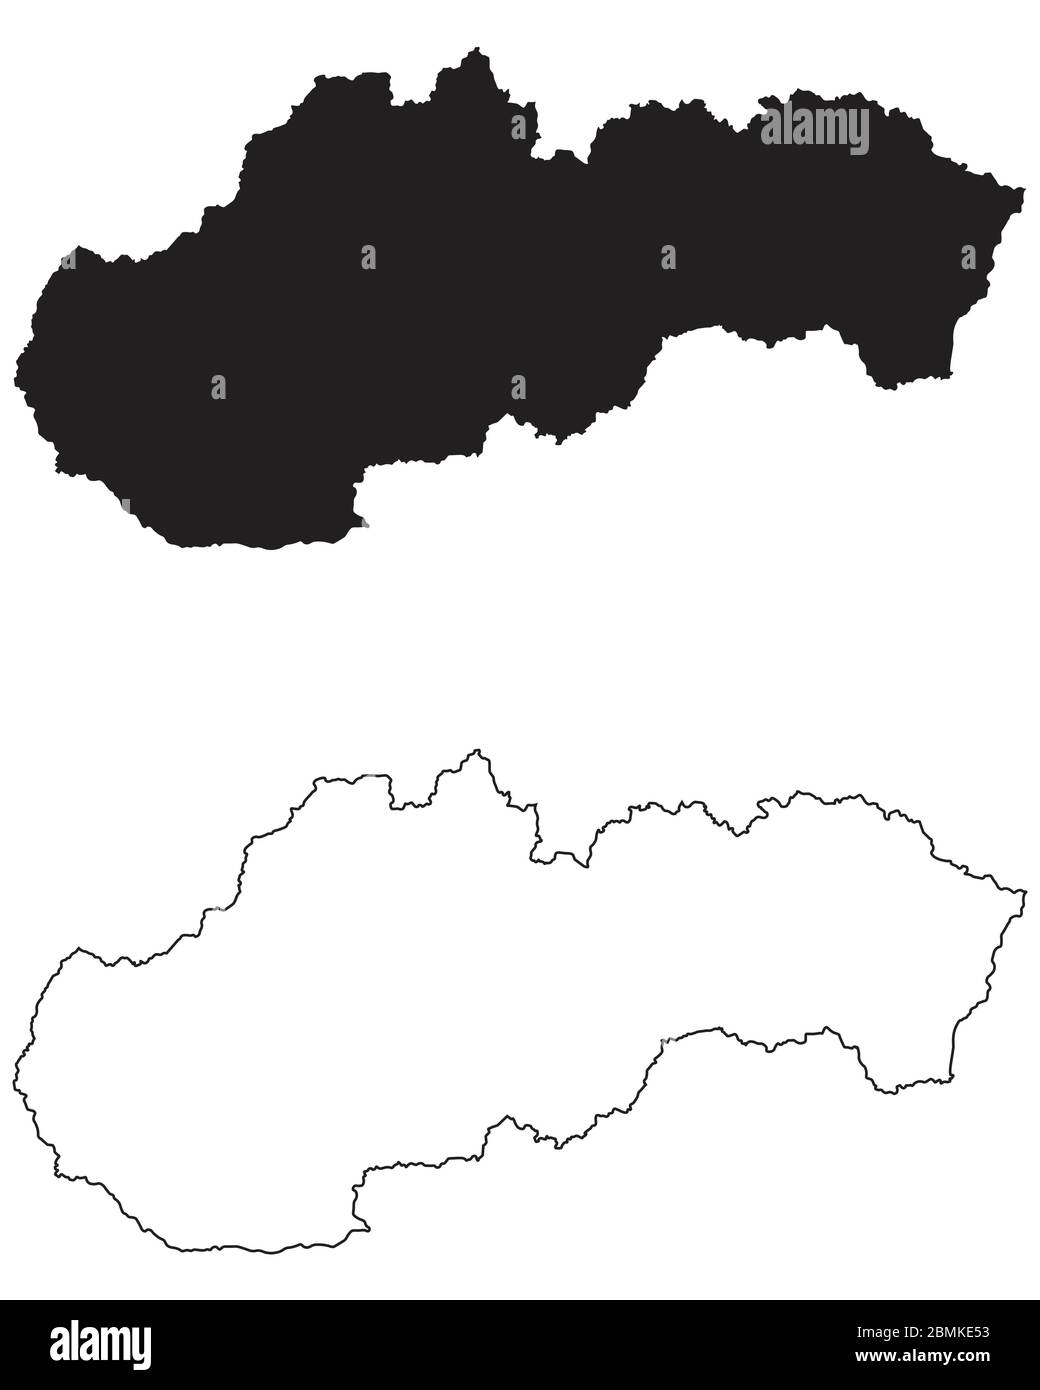 Slovakia Country Map. Black silhouette and outline isolated on white background. EPS Vector Stock Vector